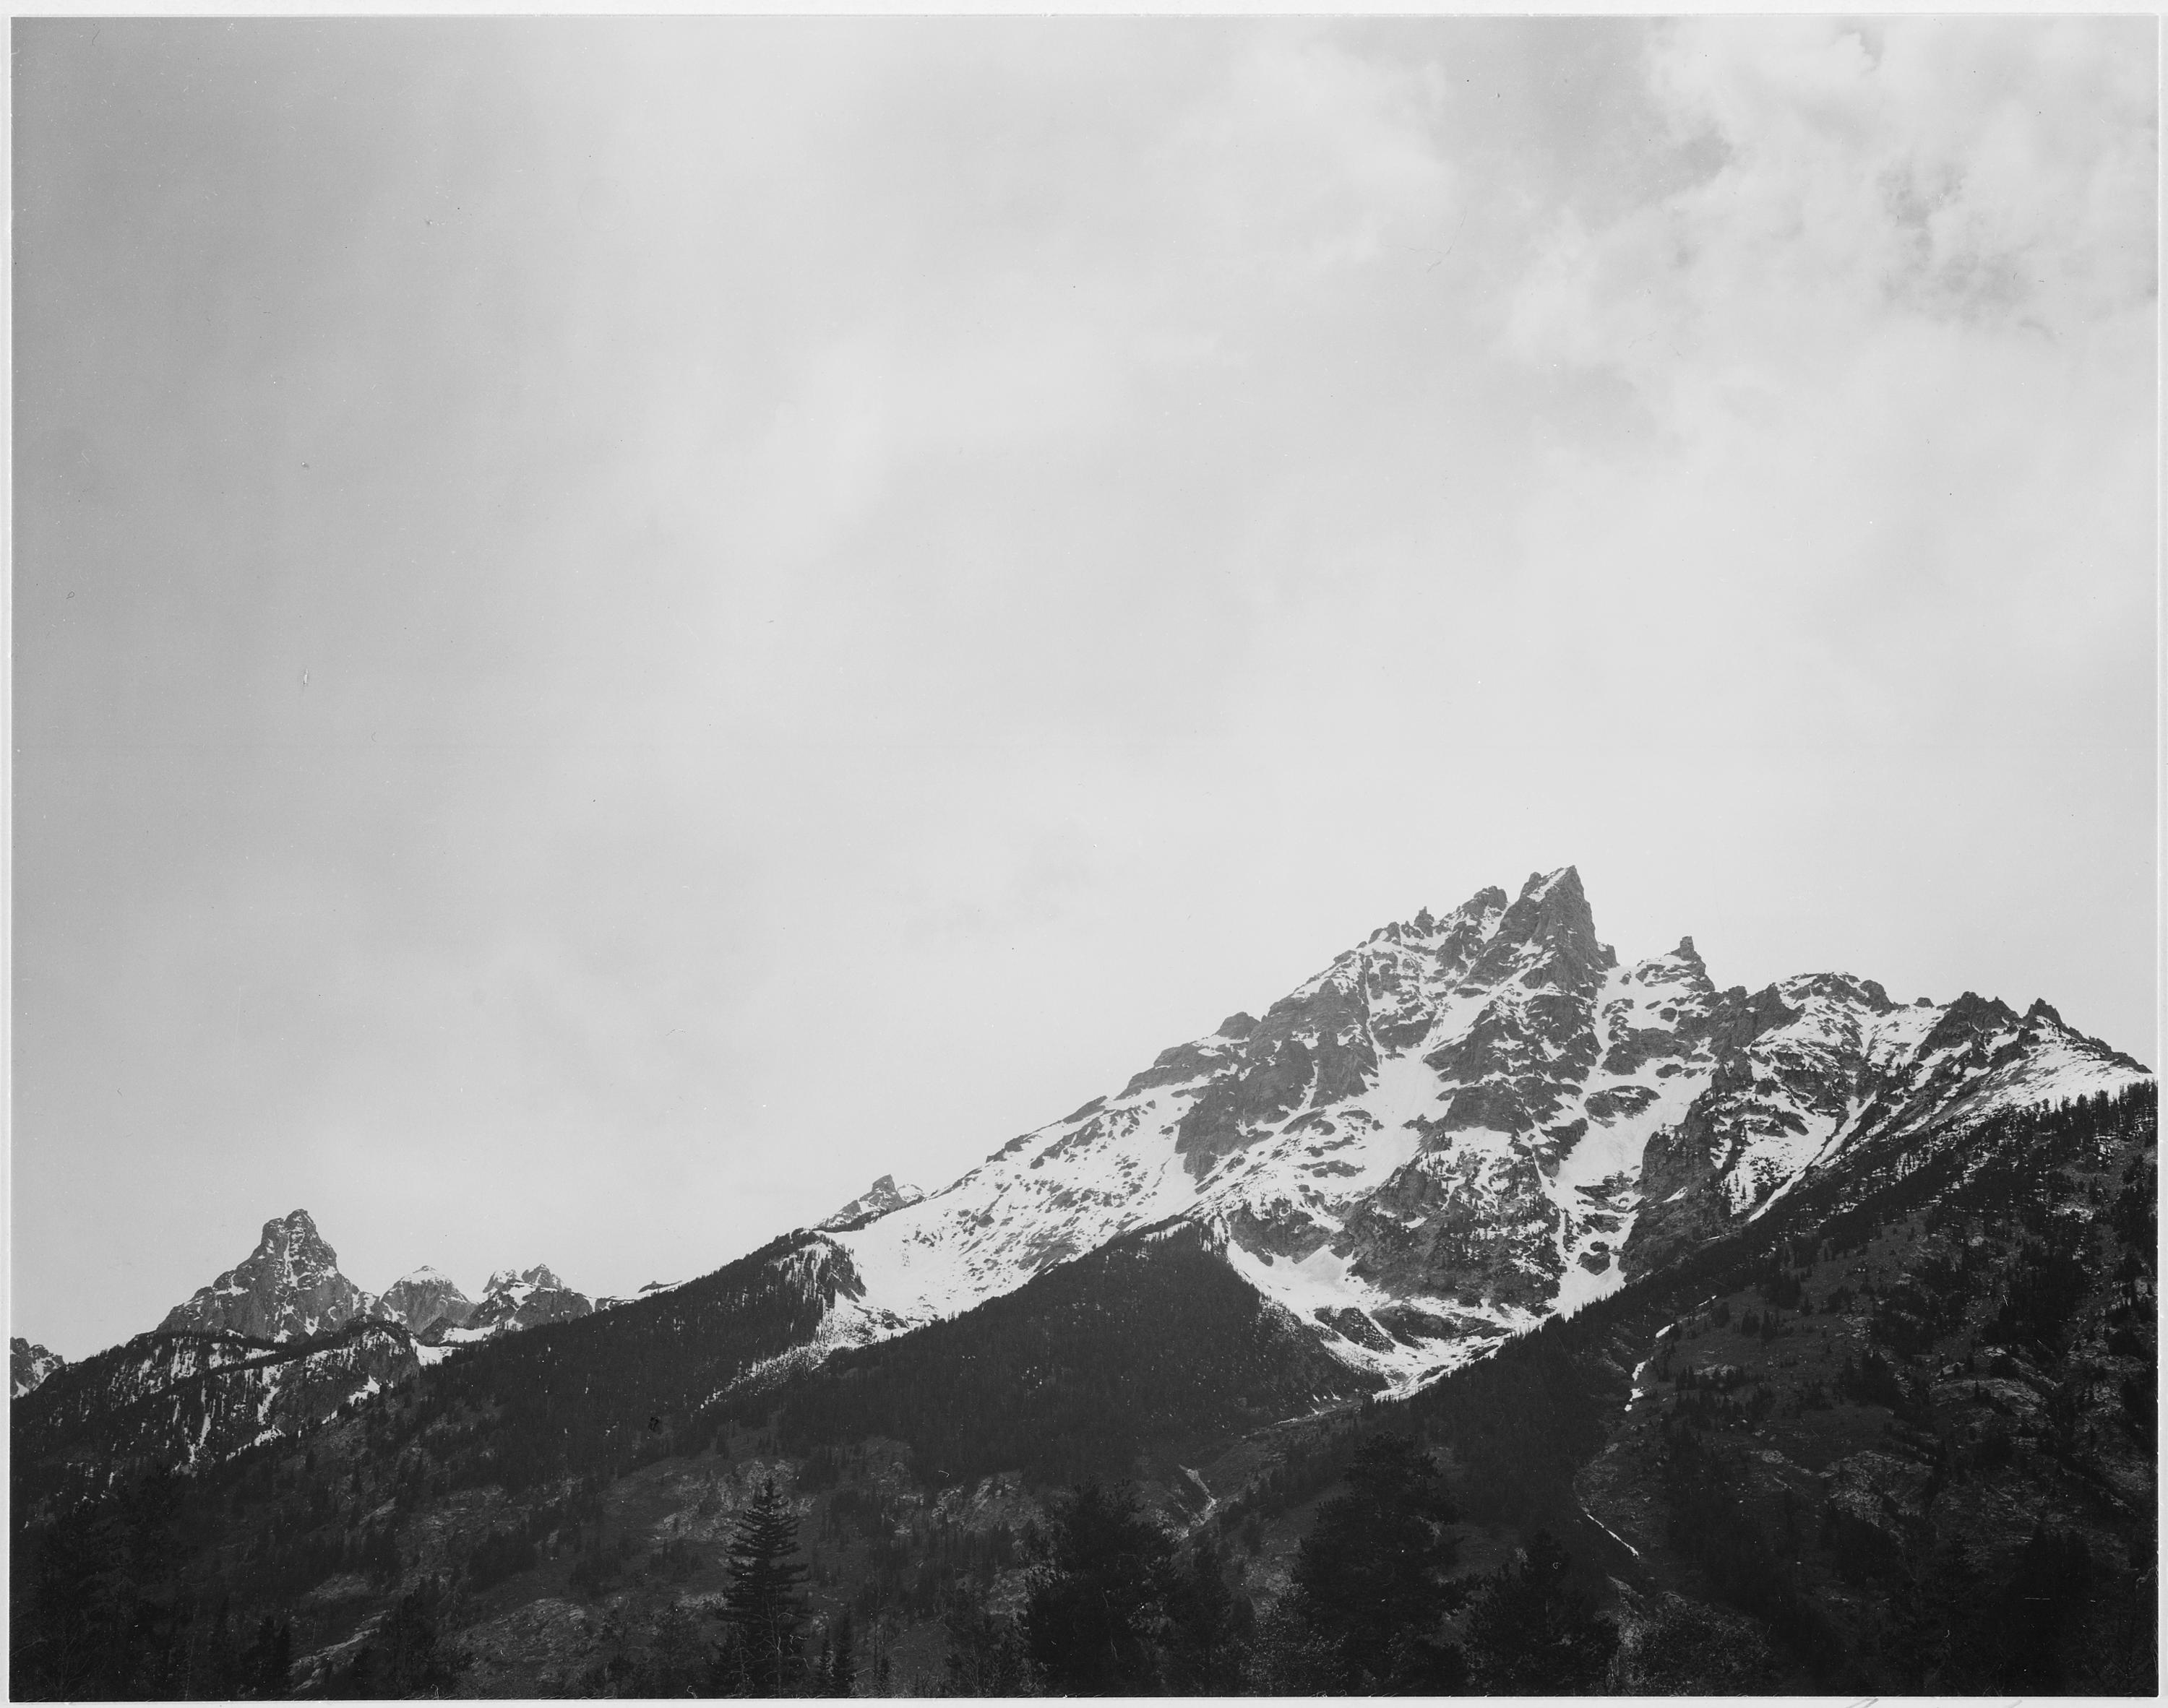 Ansel Adams - National Archives 79-AA-G10